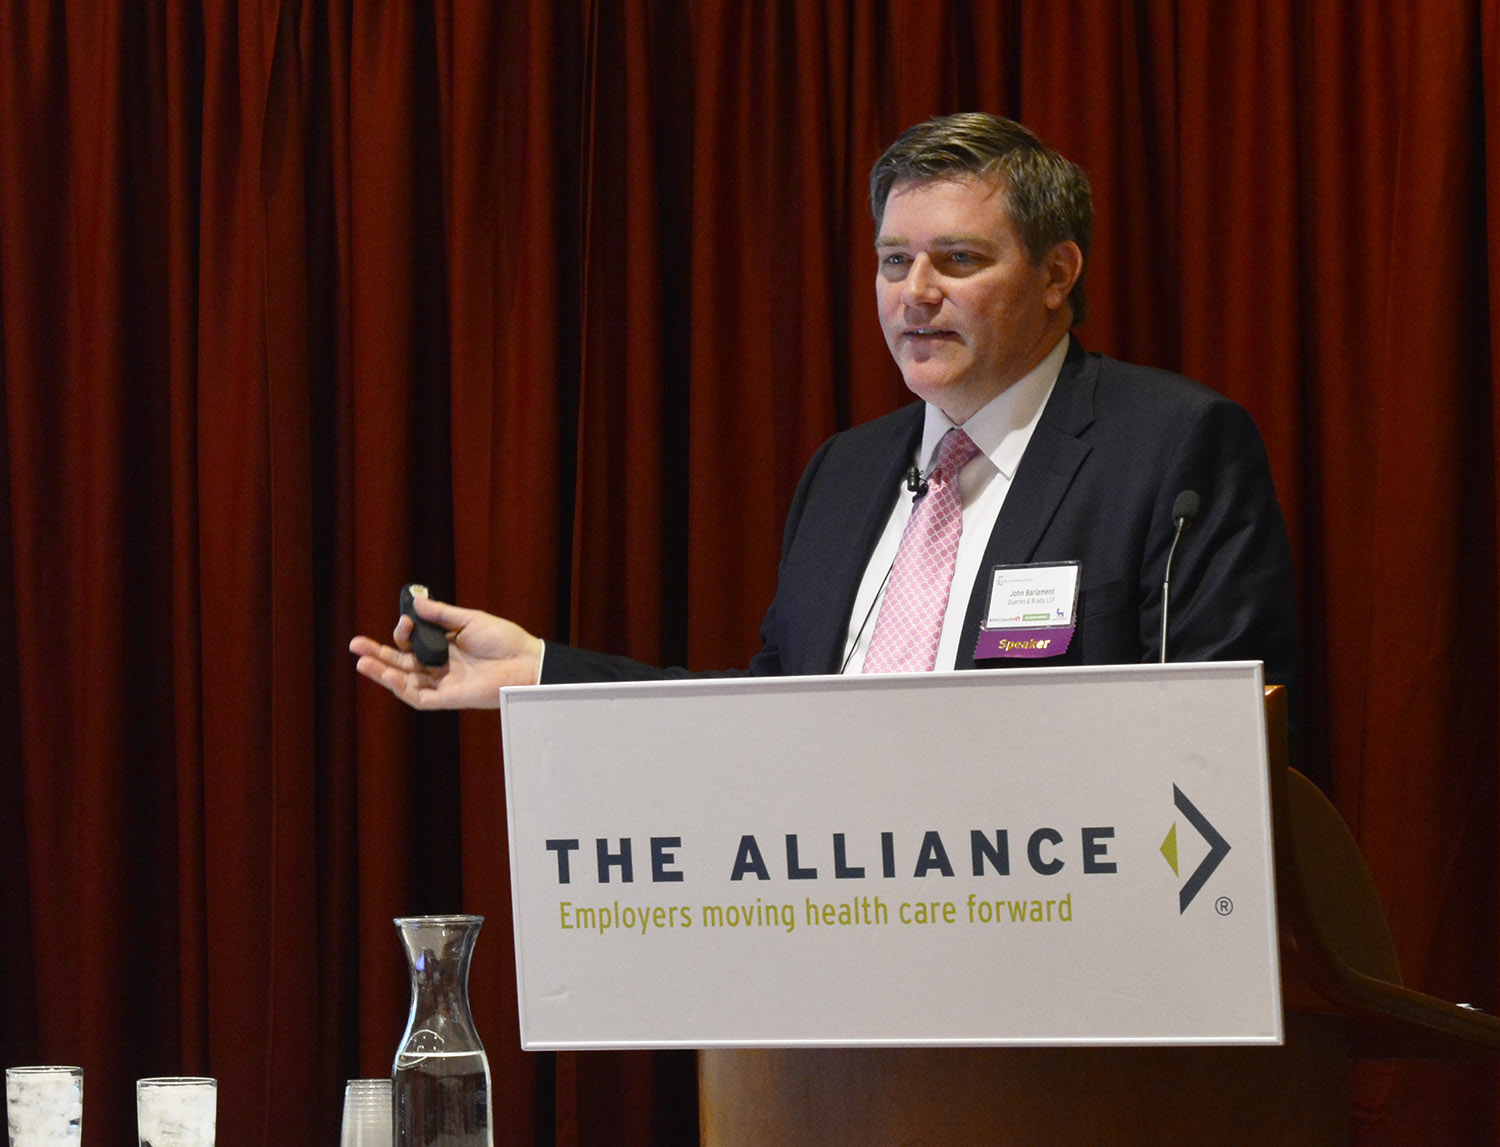 John Barlament speaking on health policy at an event by The Alliance